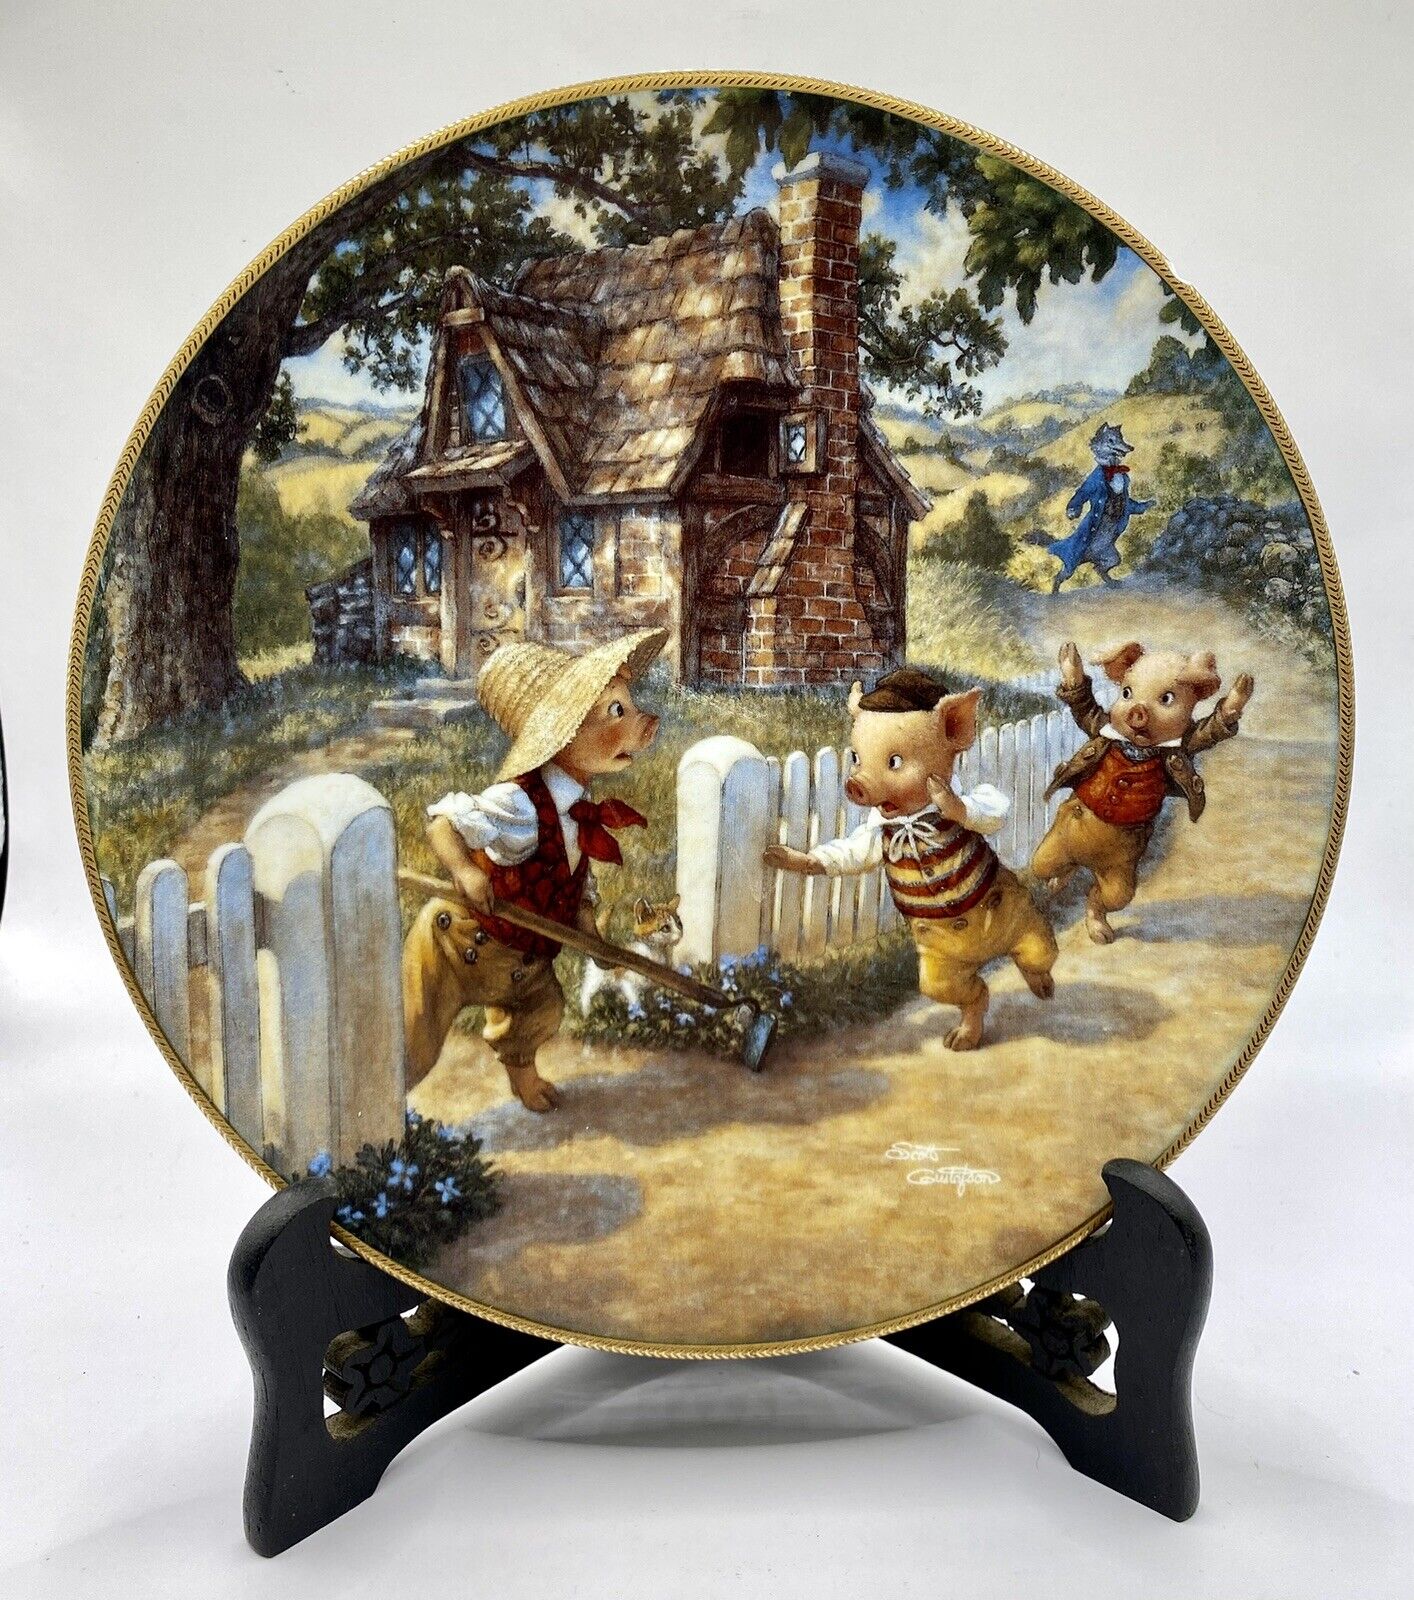 1991 Knowles Rare Collector Plate The Three Little Pigs - Classic Fairy Tales